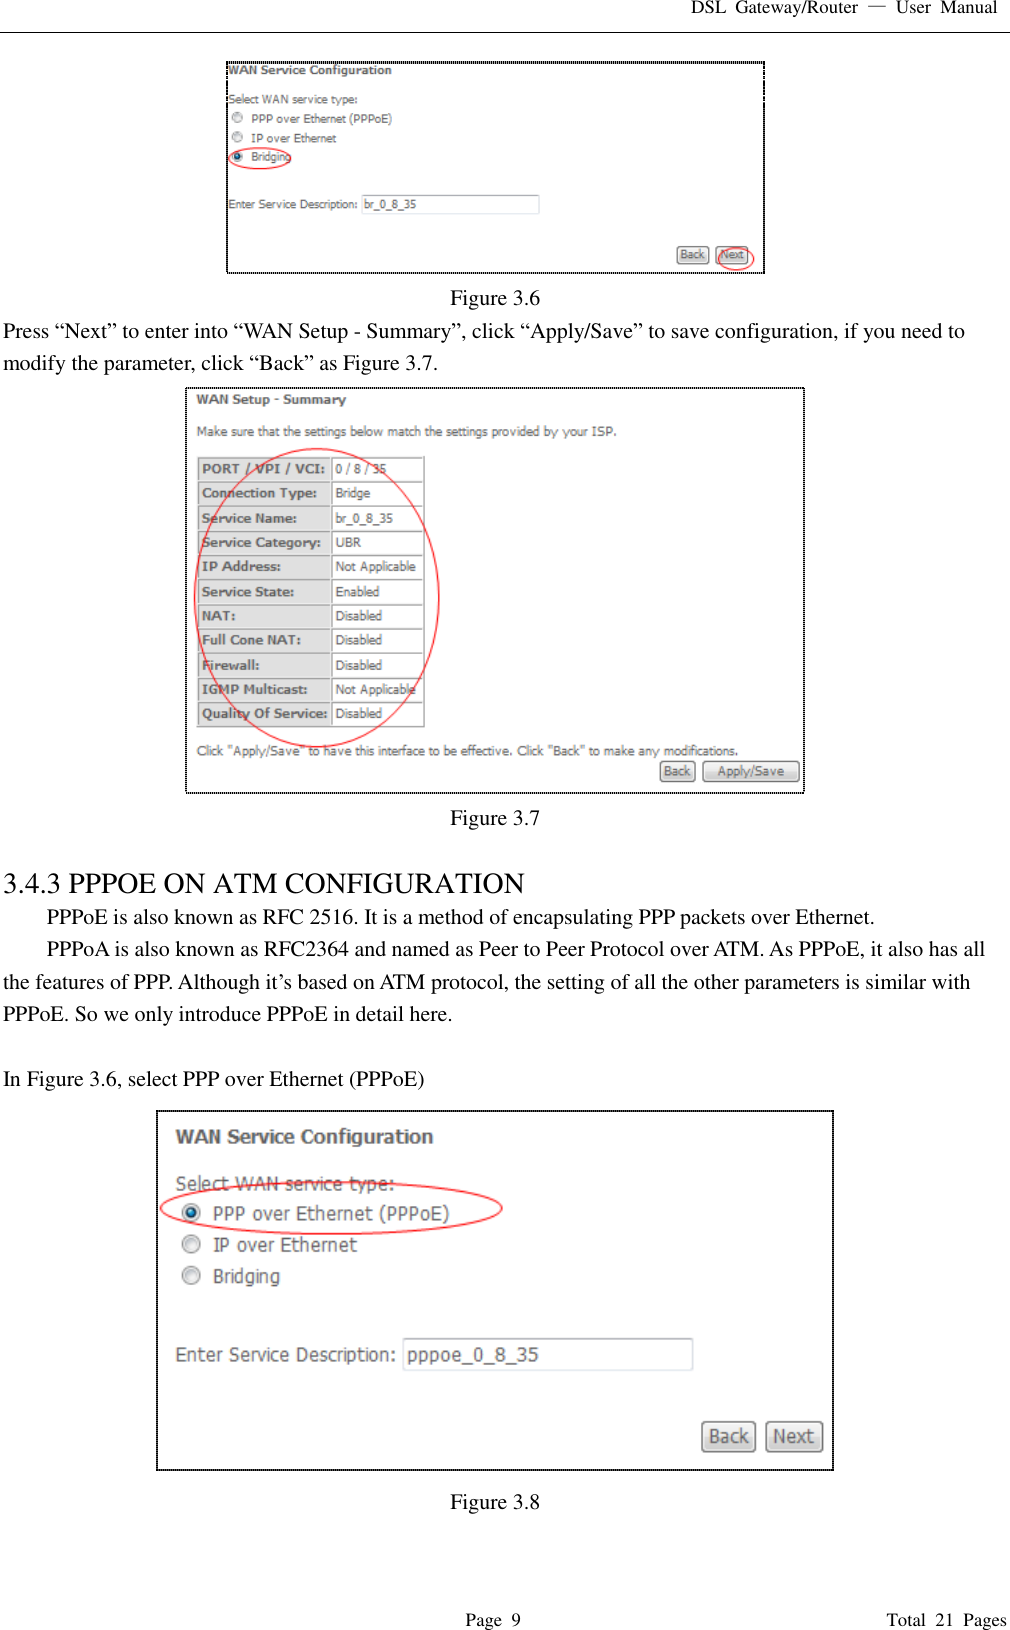 DSL  Gateway/Router  —  User  Manual   Page  9                                                                              Total  21  Pages  Figure 3.6 Press “Next” to enter into “WAN Setup - Summary”, click “Apply/Save” to save configuration, if you need to modify the parameter, click “Back” as Figure 3.7.    Figure 3.7  3.4.3 PPPOE ON ATM CONFIGURATION   PPPoE is also known as RFC 2516. It is a method of encapsulating PPP packets over Ethernet. PPPoA is also known as RFC2364 and named as Peer to Peer Protocol over ATM. As PPPoE, it also has all the features of PPP. Although it’s based on ATM protocol, the setting of all the other parameters is similar with PPPoE. So we only introduce PPPoE in detail here.    In Figure 3.6, select PPP over Ethernet (PPPoE)  Figure 3.8  